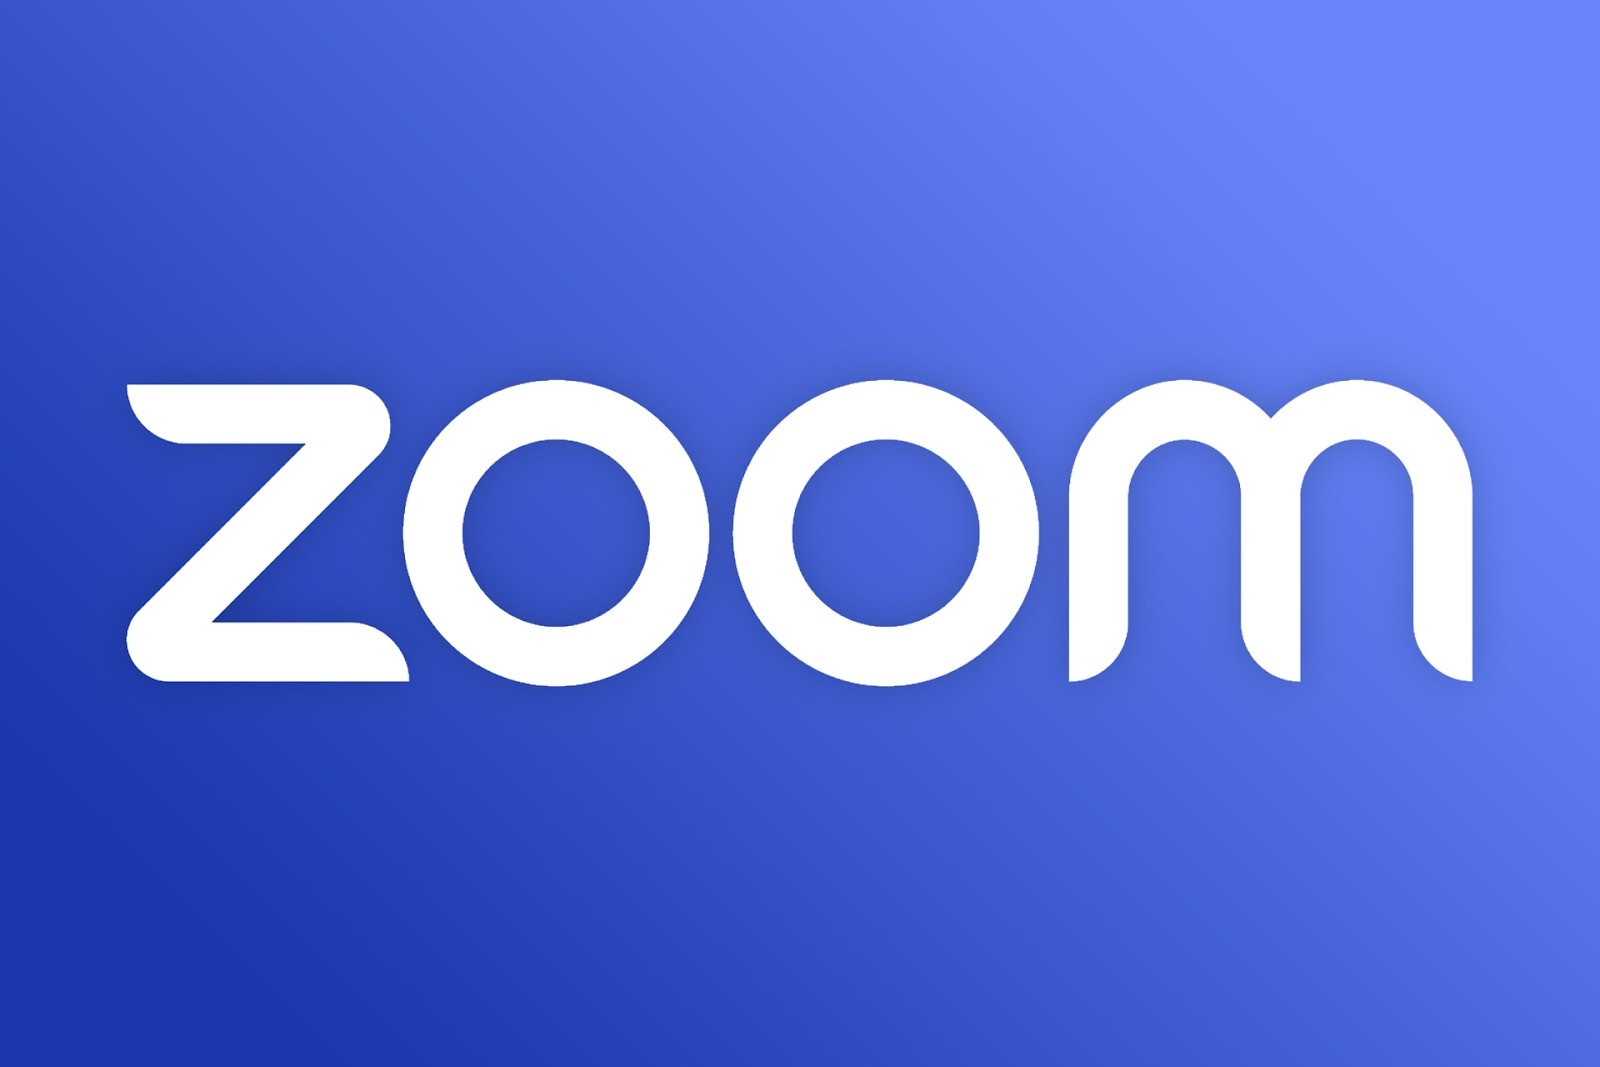 spam-resource:-zoom-launches-new-email-service